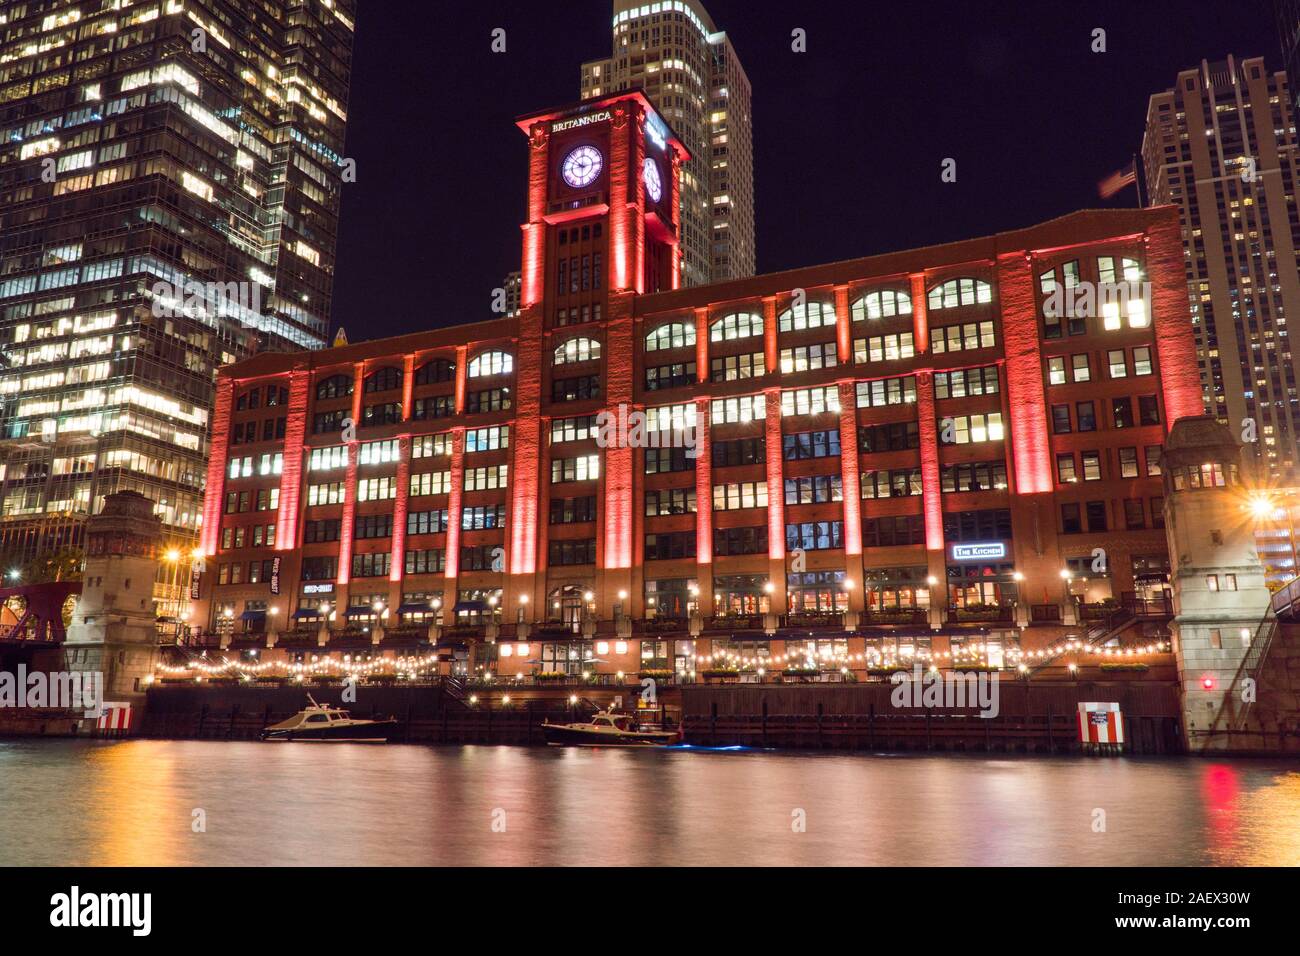 Chicago, IL, Circa 2019: Night time exterior establishing shot of red clock tower Whirlpool building architecture in Chicago along famous river walk Stock Photo